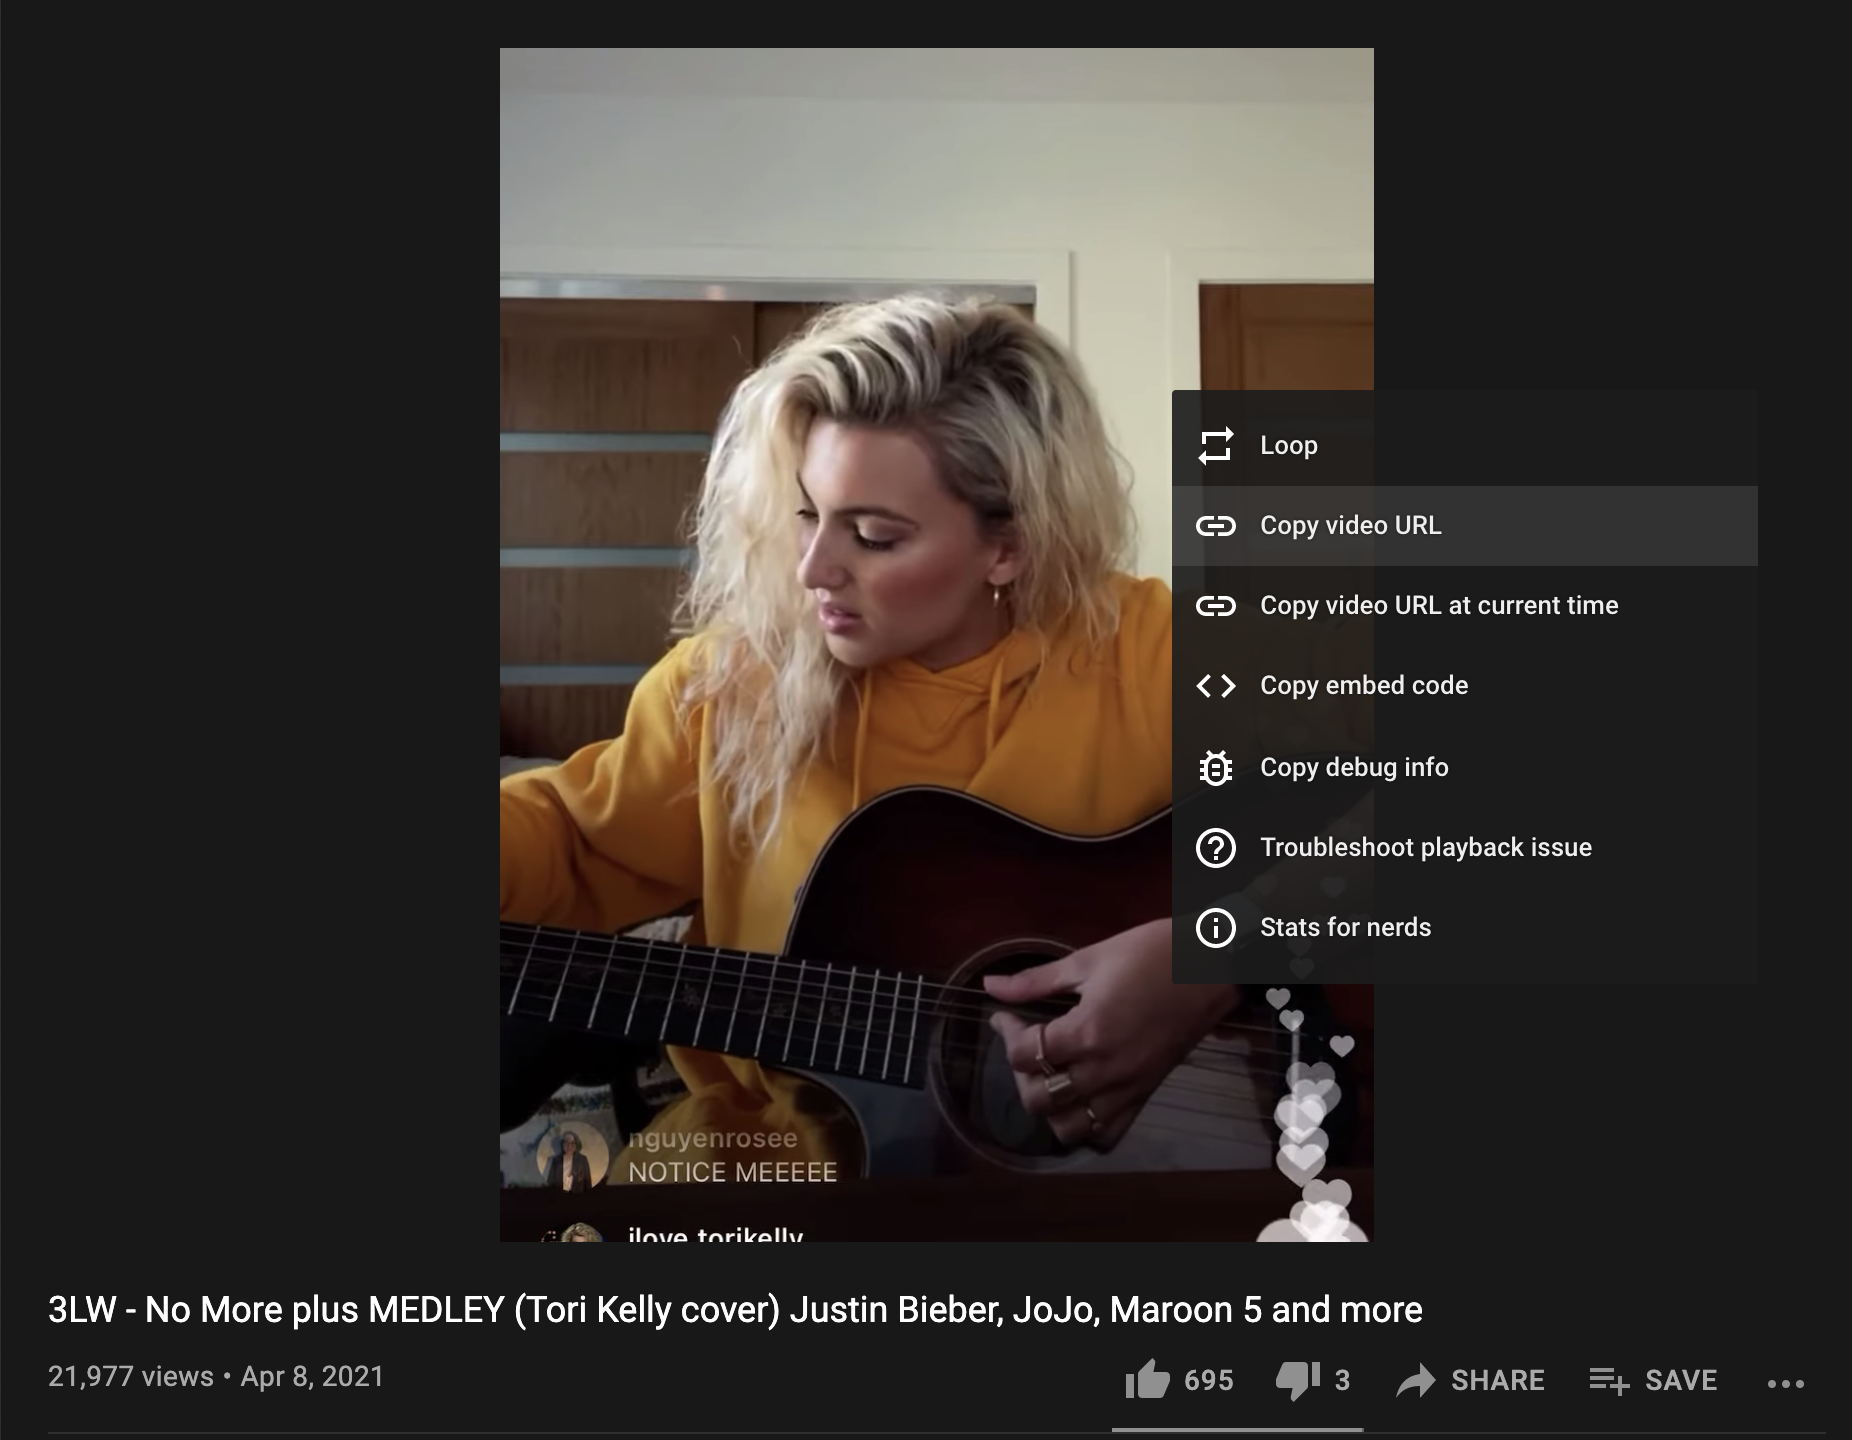 YouTube video with Tori Kelly singing and a pop up box with the option to copy video URL highlighted